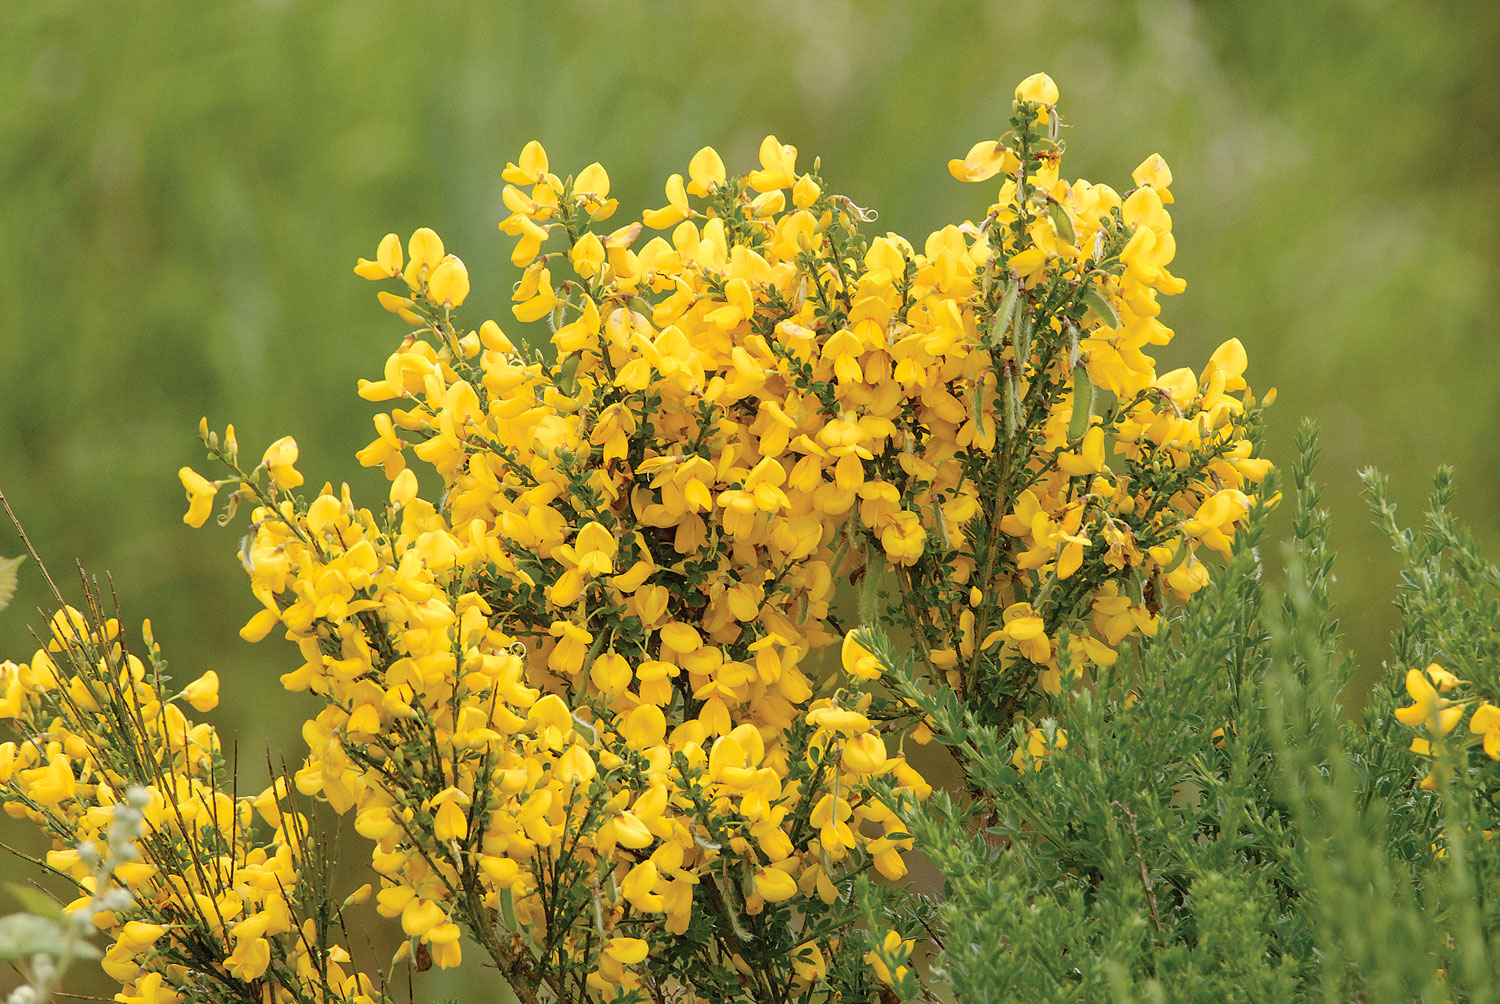 Blooming scotch broom plant